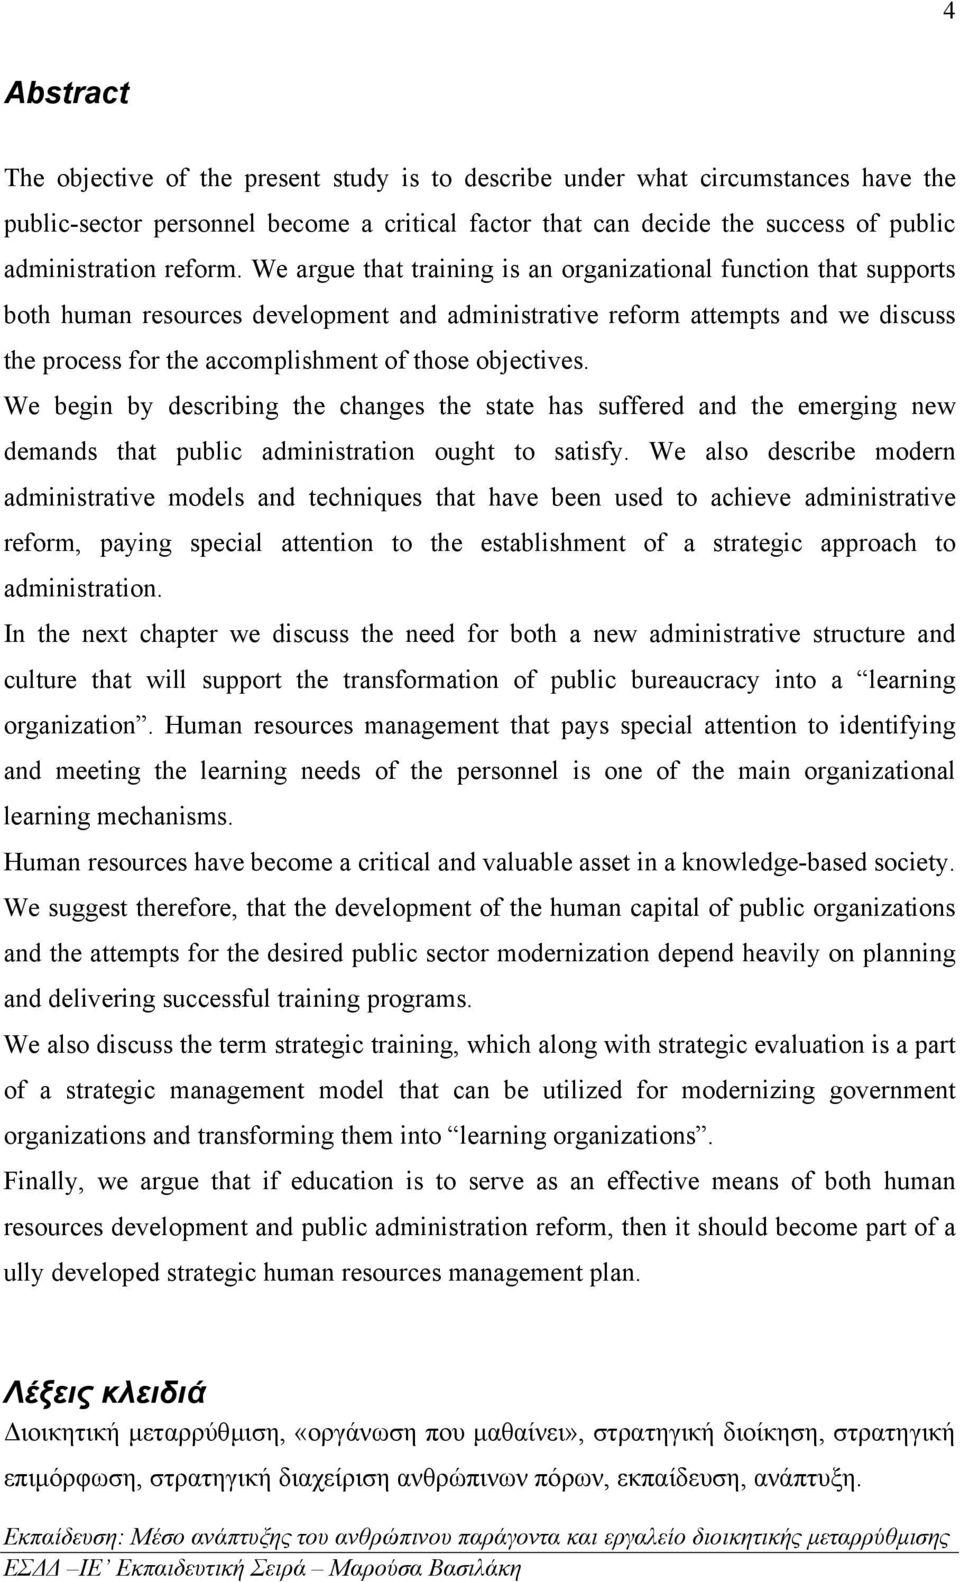 We argue that training is an organizational function that supports both human resources development and administrative reform attempts and we discuss the process for the accomplishment of those